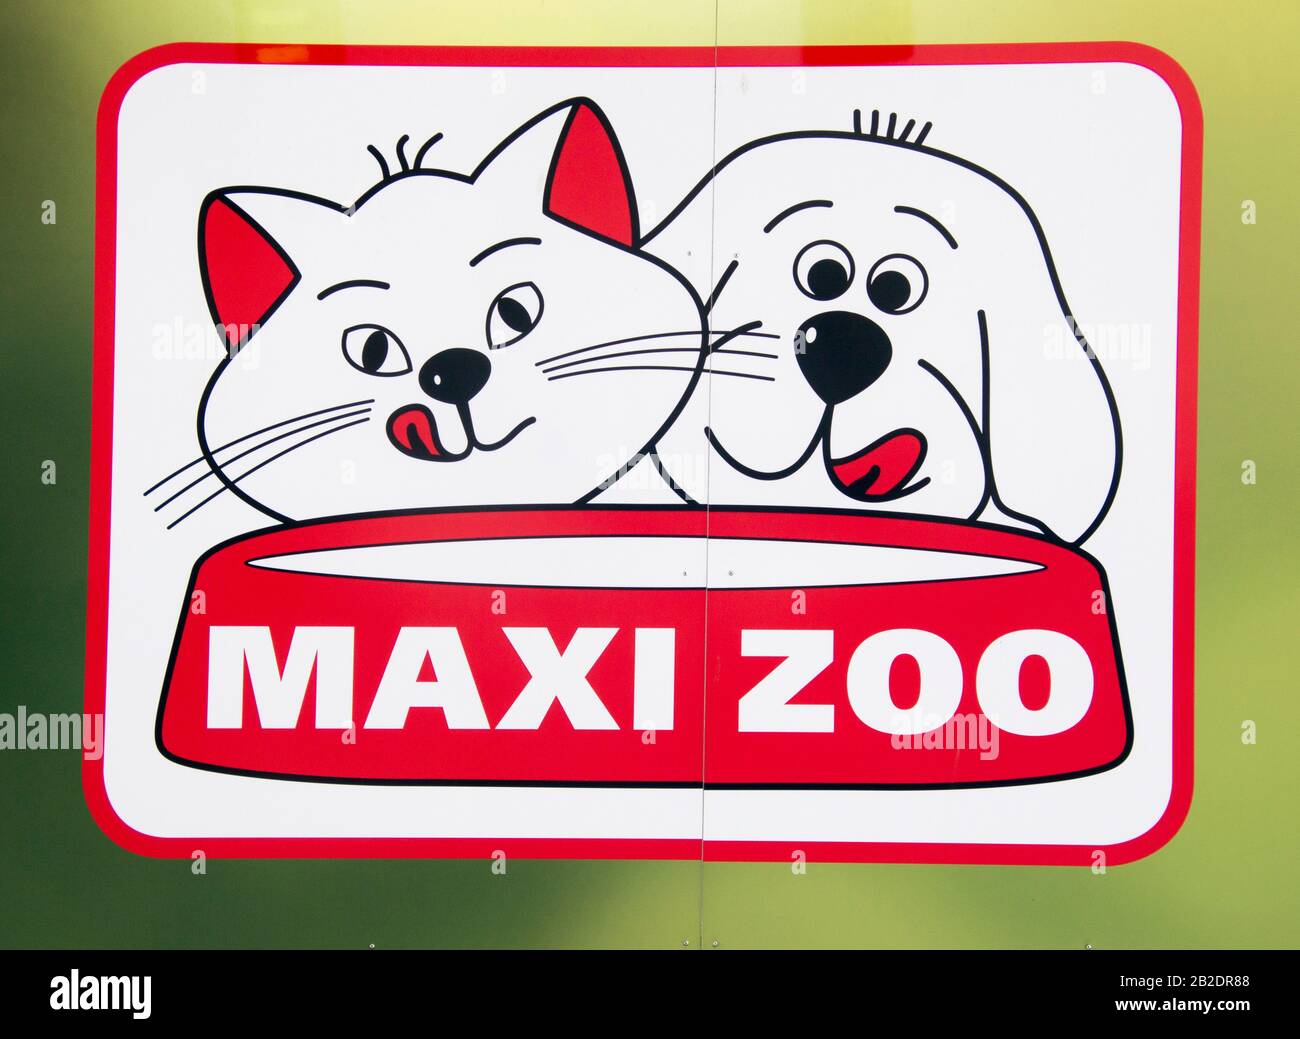 Randers, Denmark - 02 March 2020: The logo of the Maxi Zoo building in Randers. Stock Photo